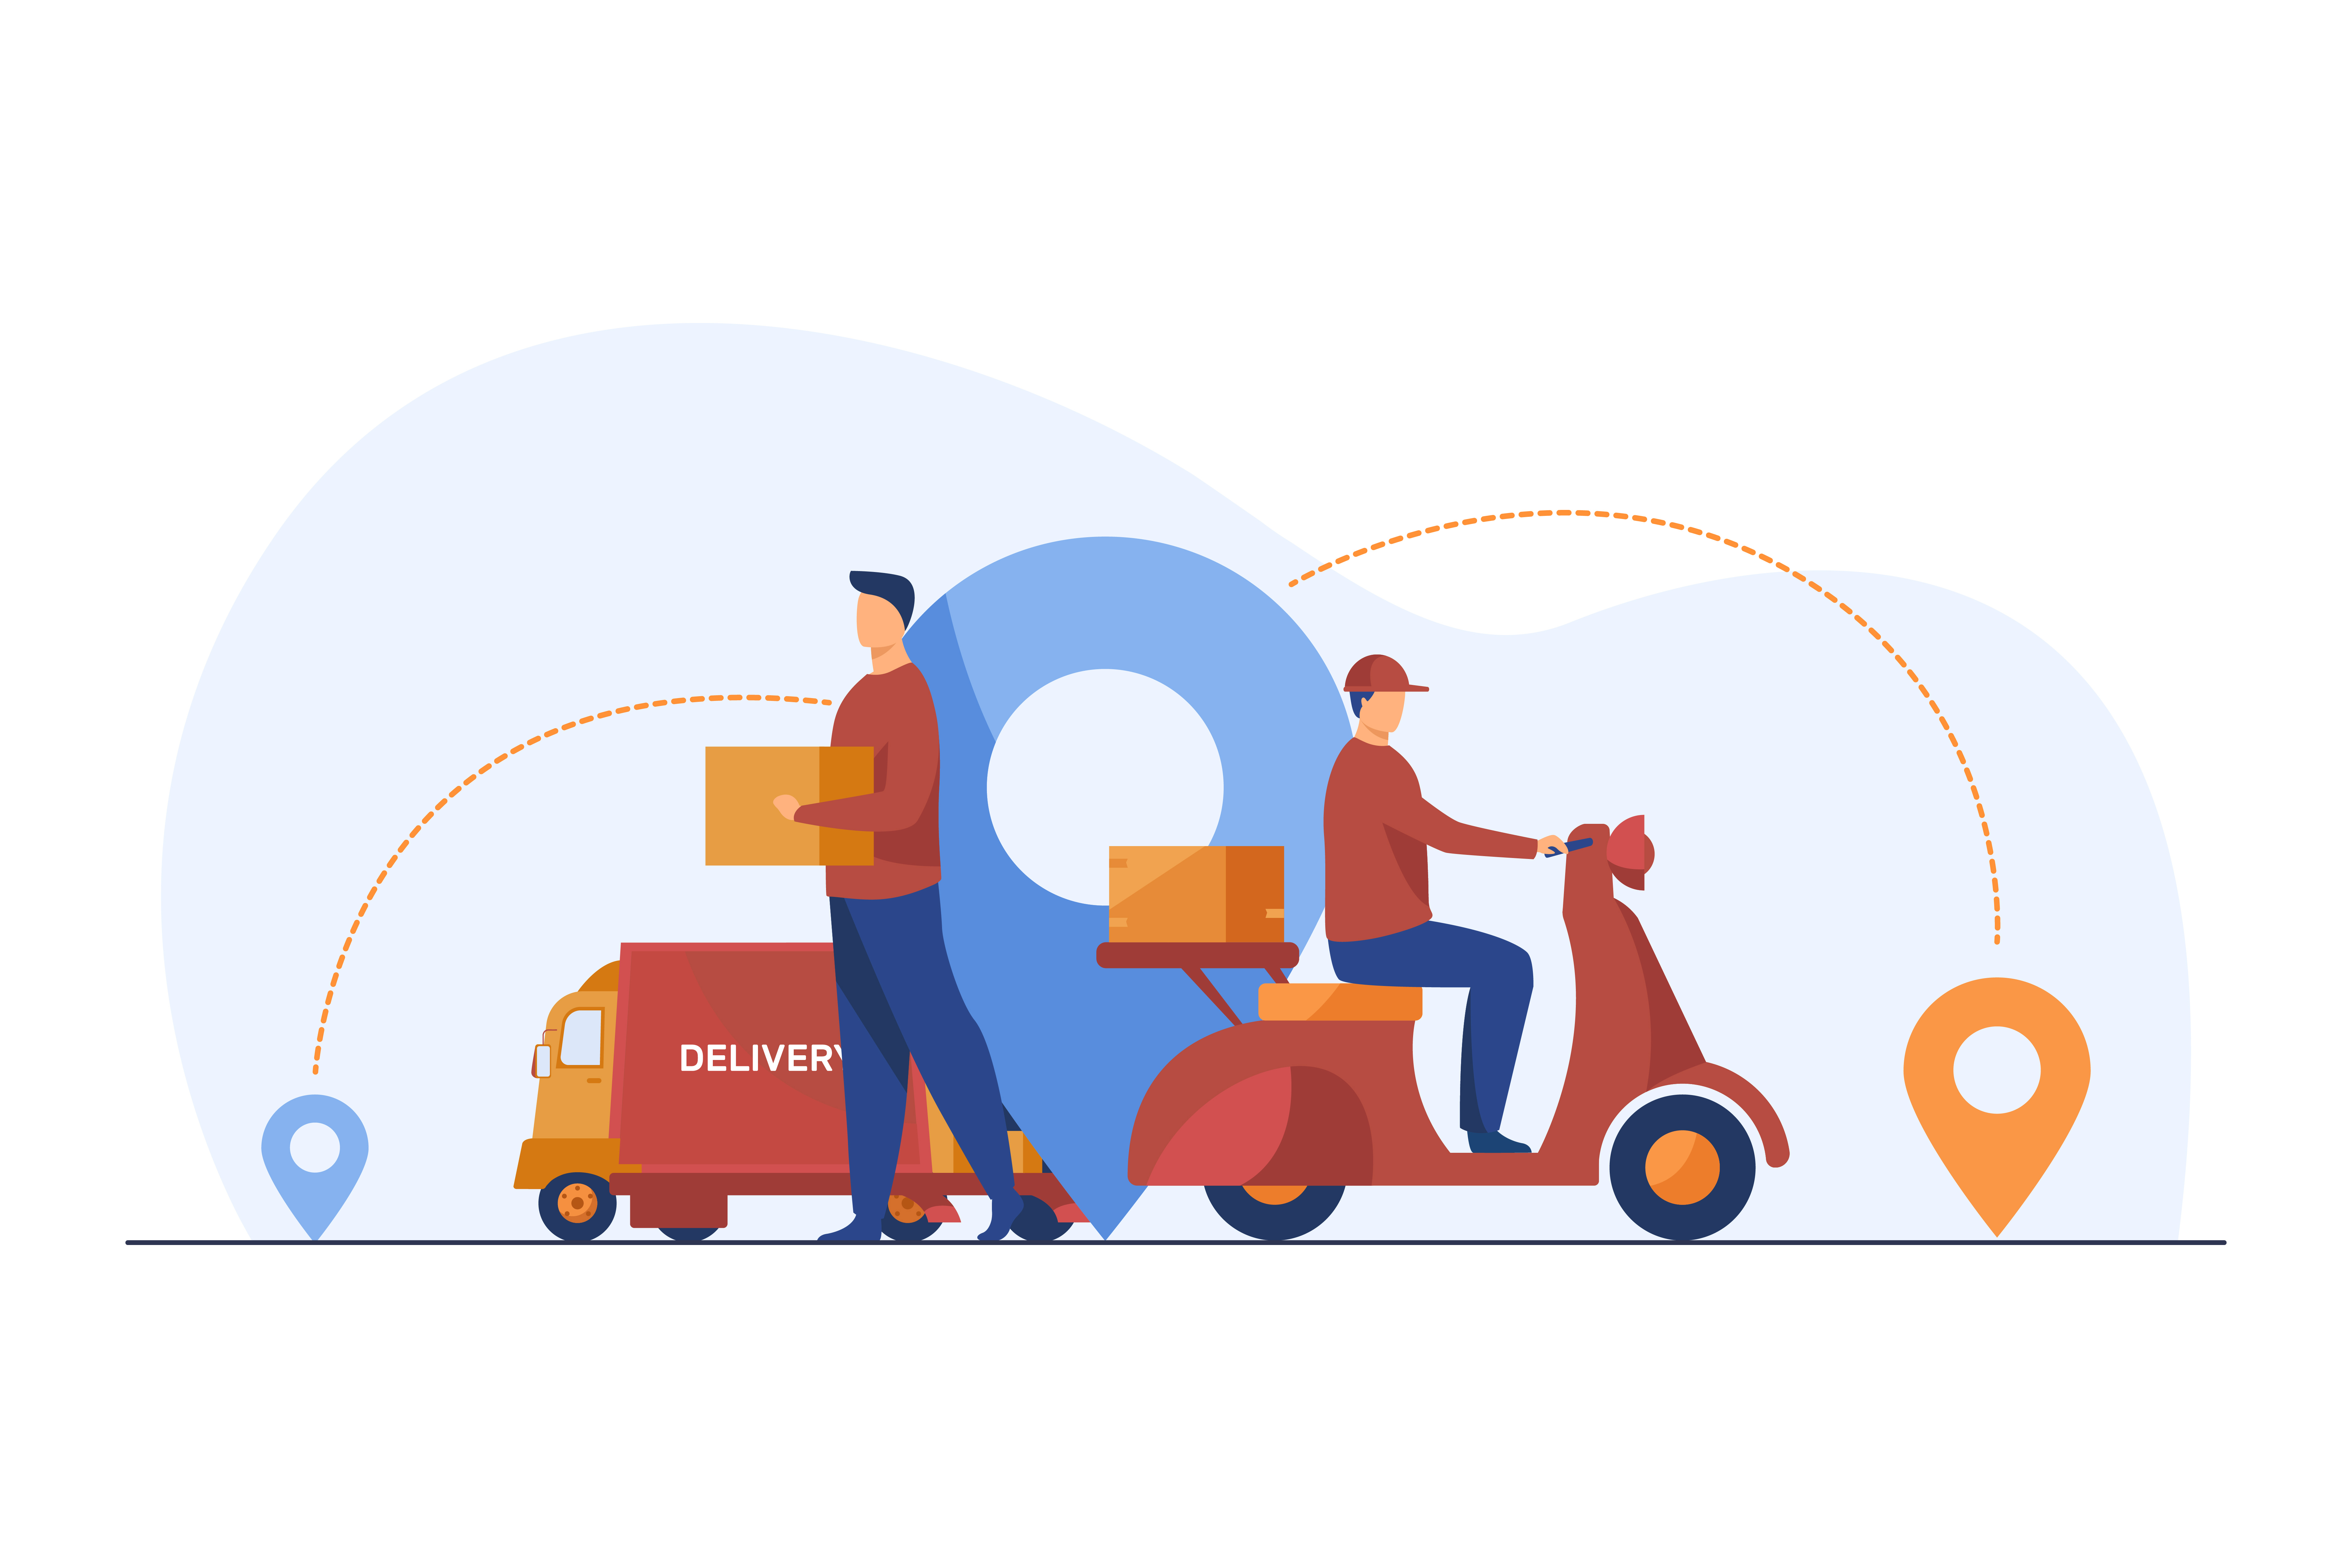 Male couriers delivering parcels. Scooter, truck, map pointers flat vector illustration. Shipping, logistics, service concept for banner, website design or landing web page